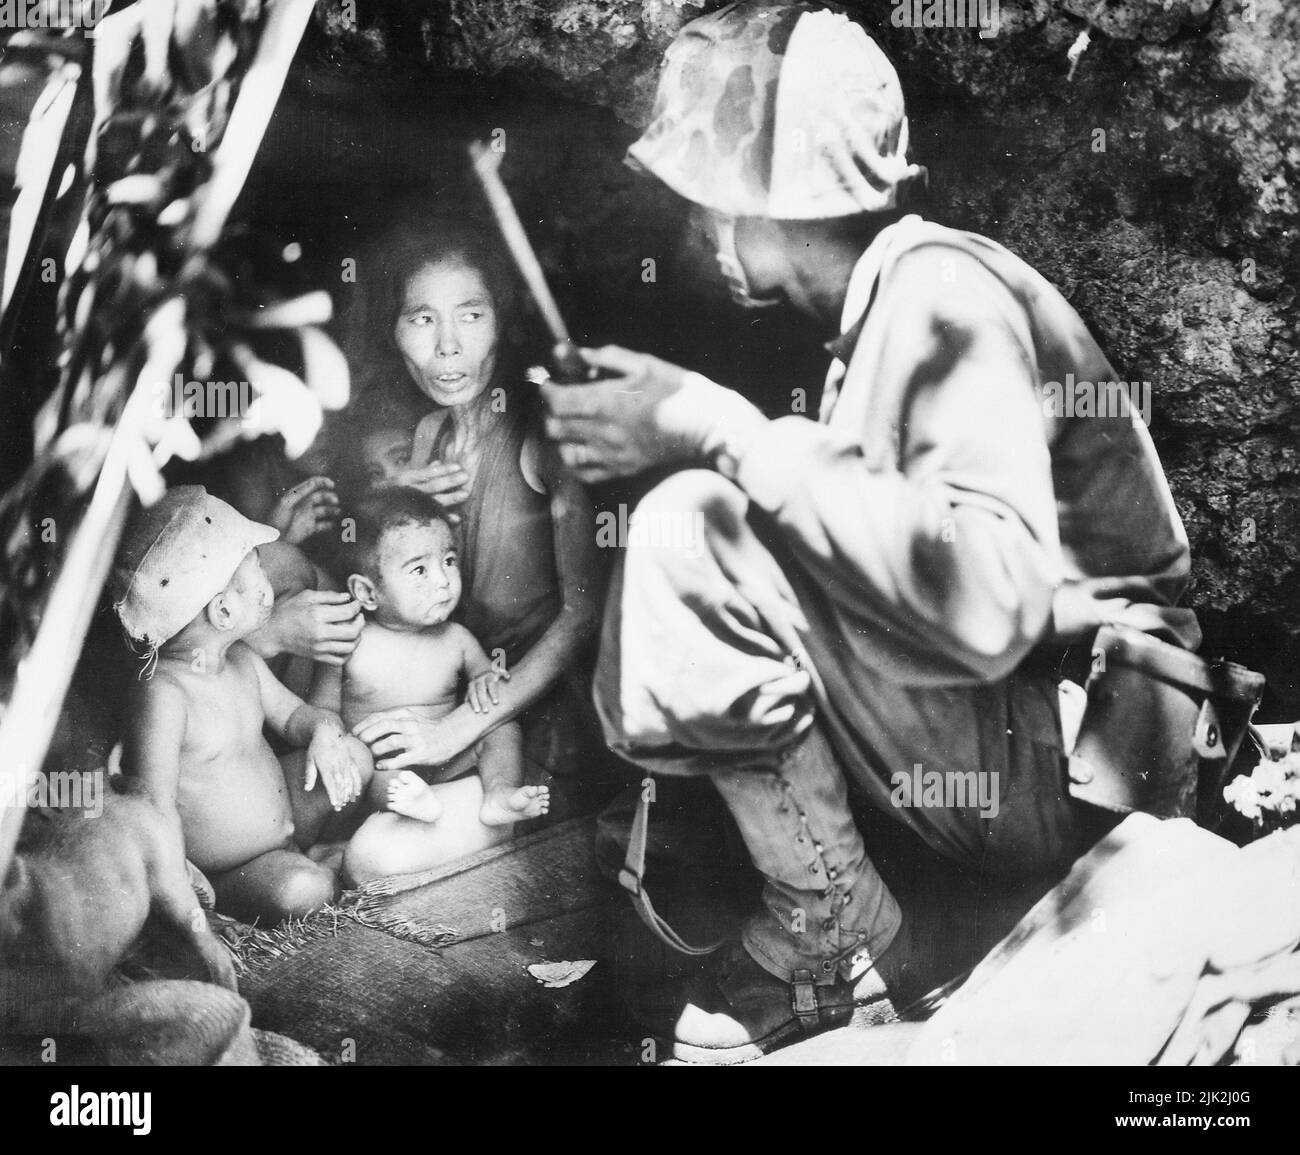 A member of a Marine patrol on Saipan found this family of Japs hiding in a hillside cave. The mother, four children and a dog, took shelter from the fierce fighting in that area. Stock Photo